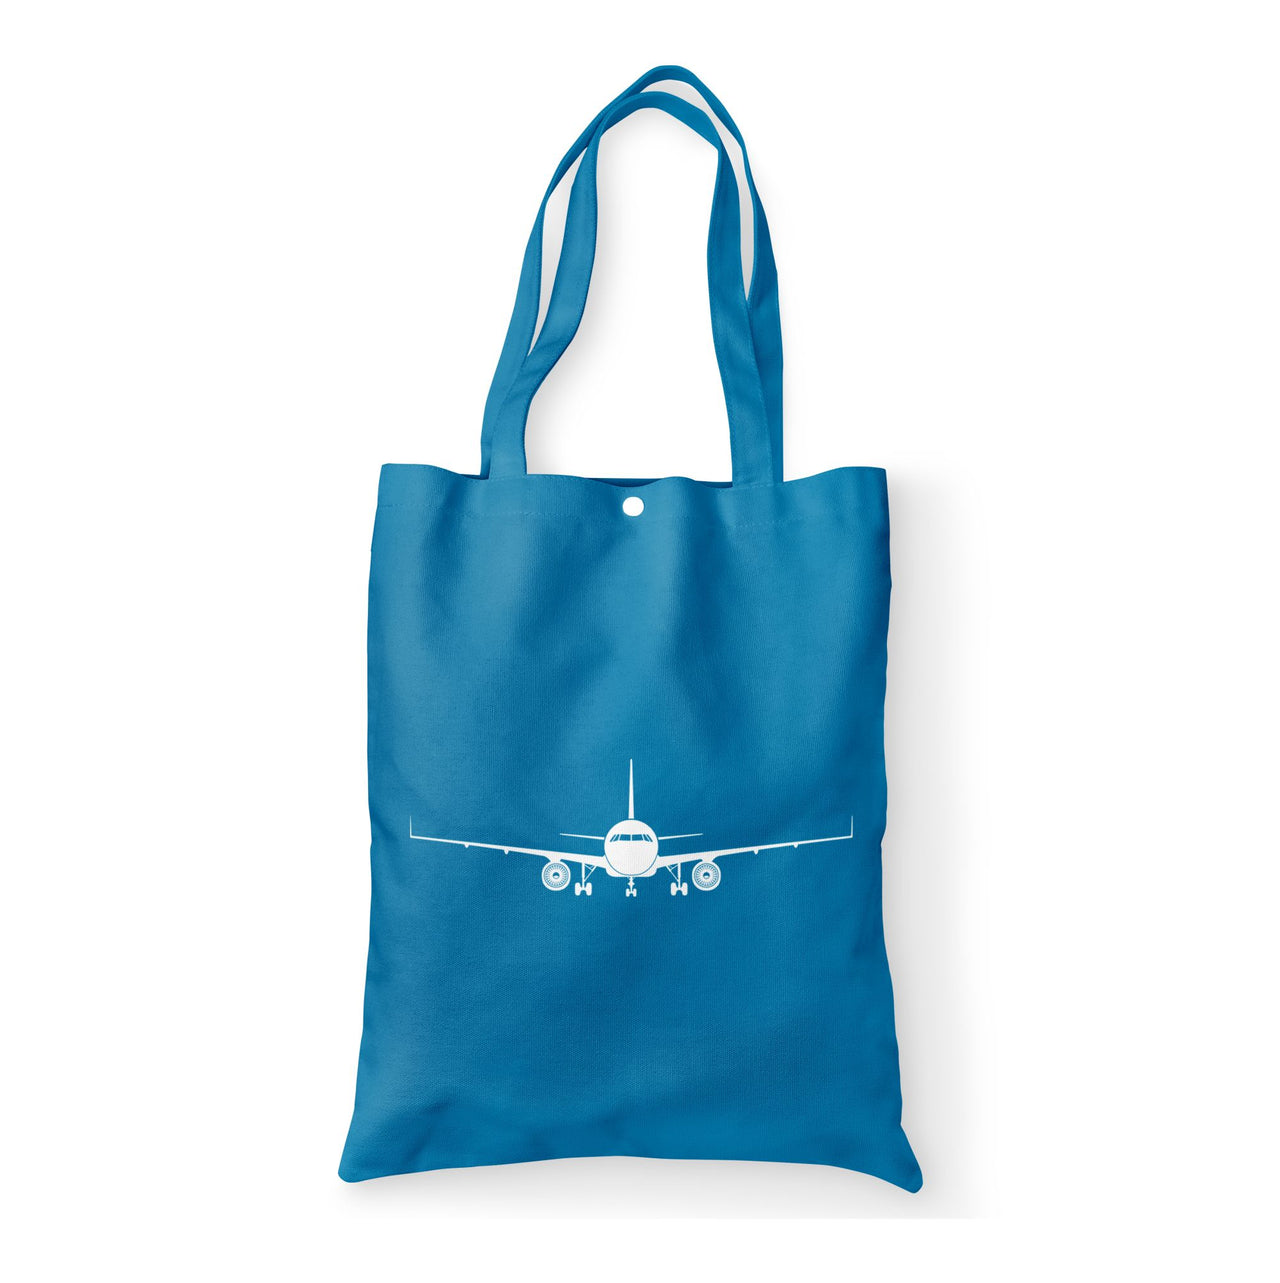 Airbus A320 Silhouette Designed Tote Bags